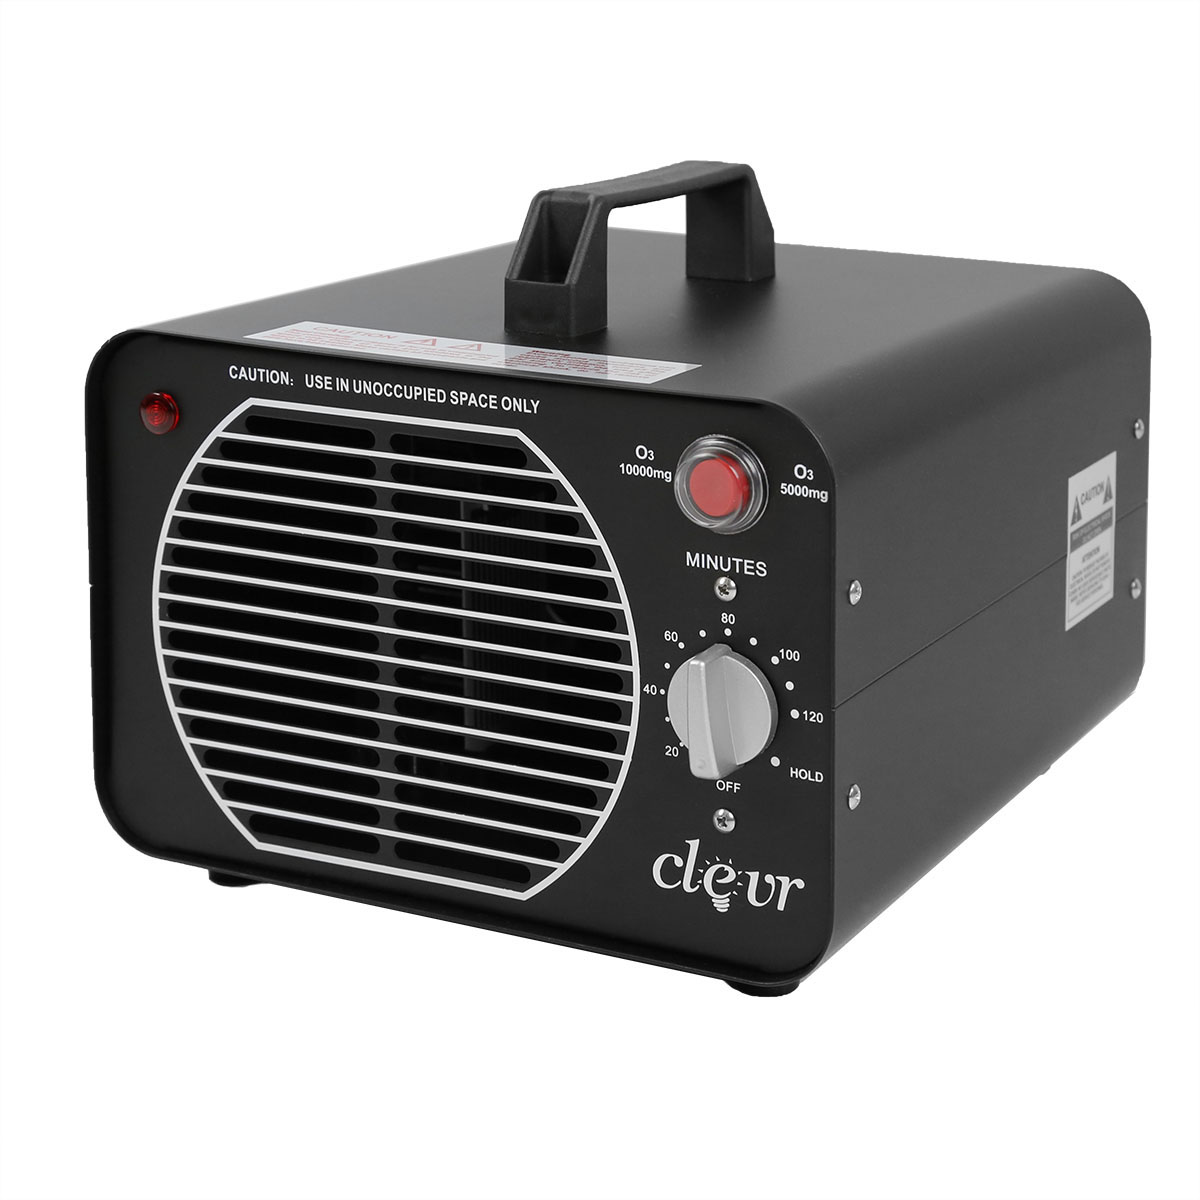 Buy Clevr Commercial and Home Ozone Generator O3 Air Purifier, 100005000mgh Online Lowest Price in Ubuy Kuwait. 911182668